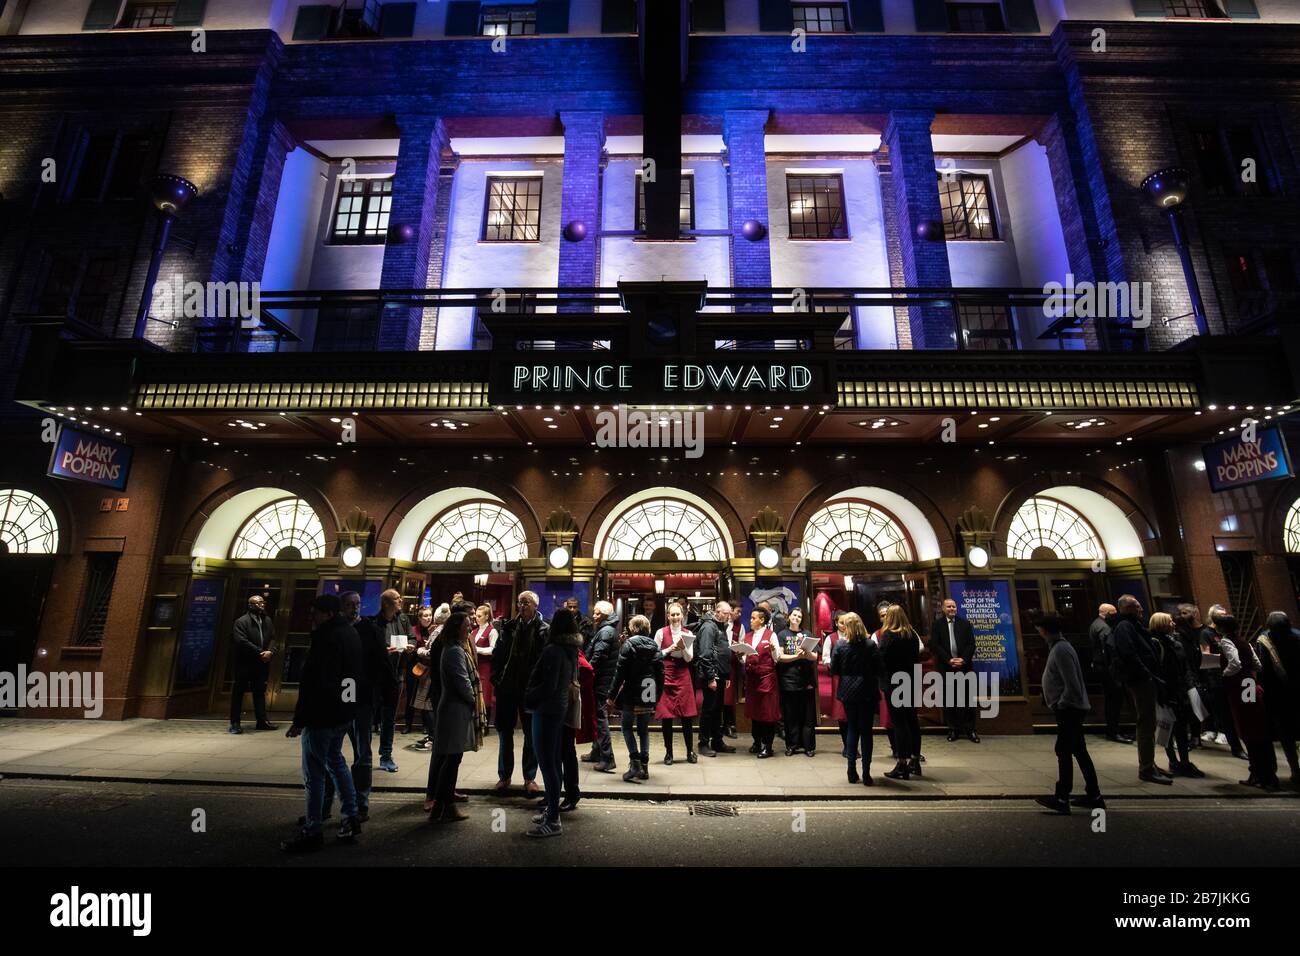 Staff from The Prince Edward, London, inform patrons, as it shuts its doors, following a statement from Pime Minister Boris Johnson today at 5pm. Stock Photo